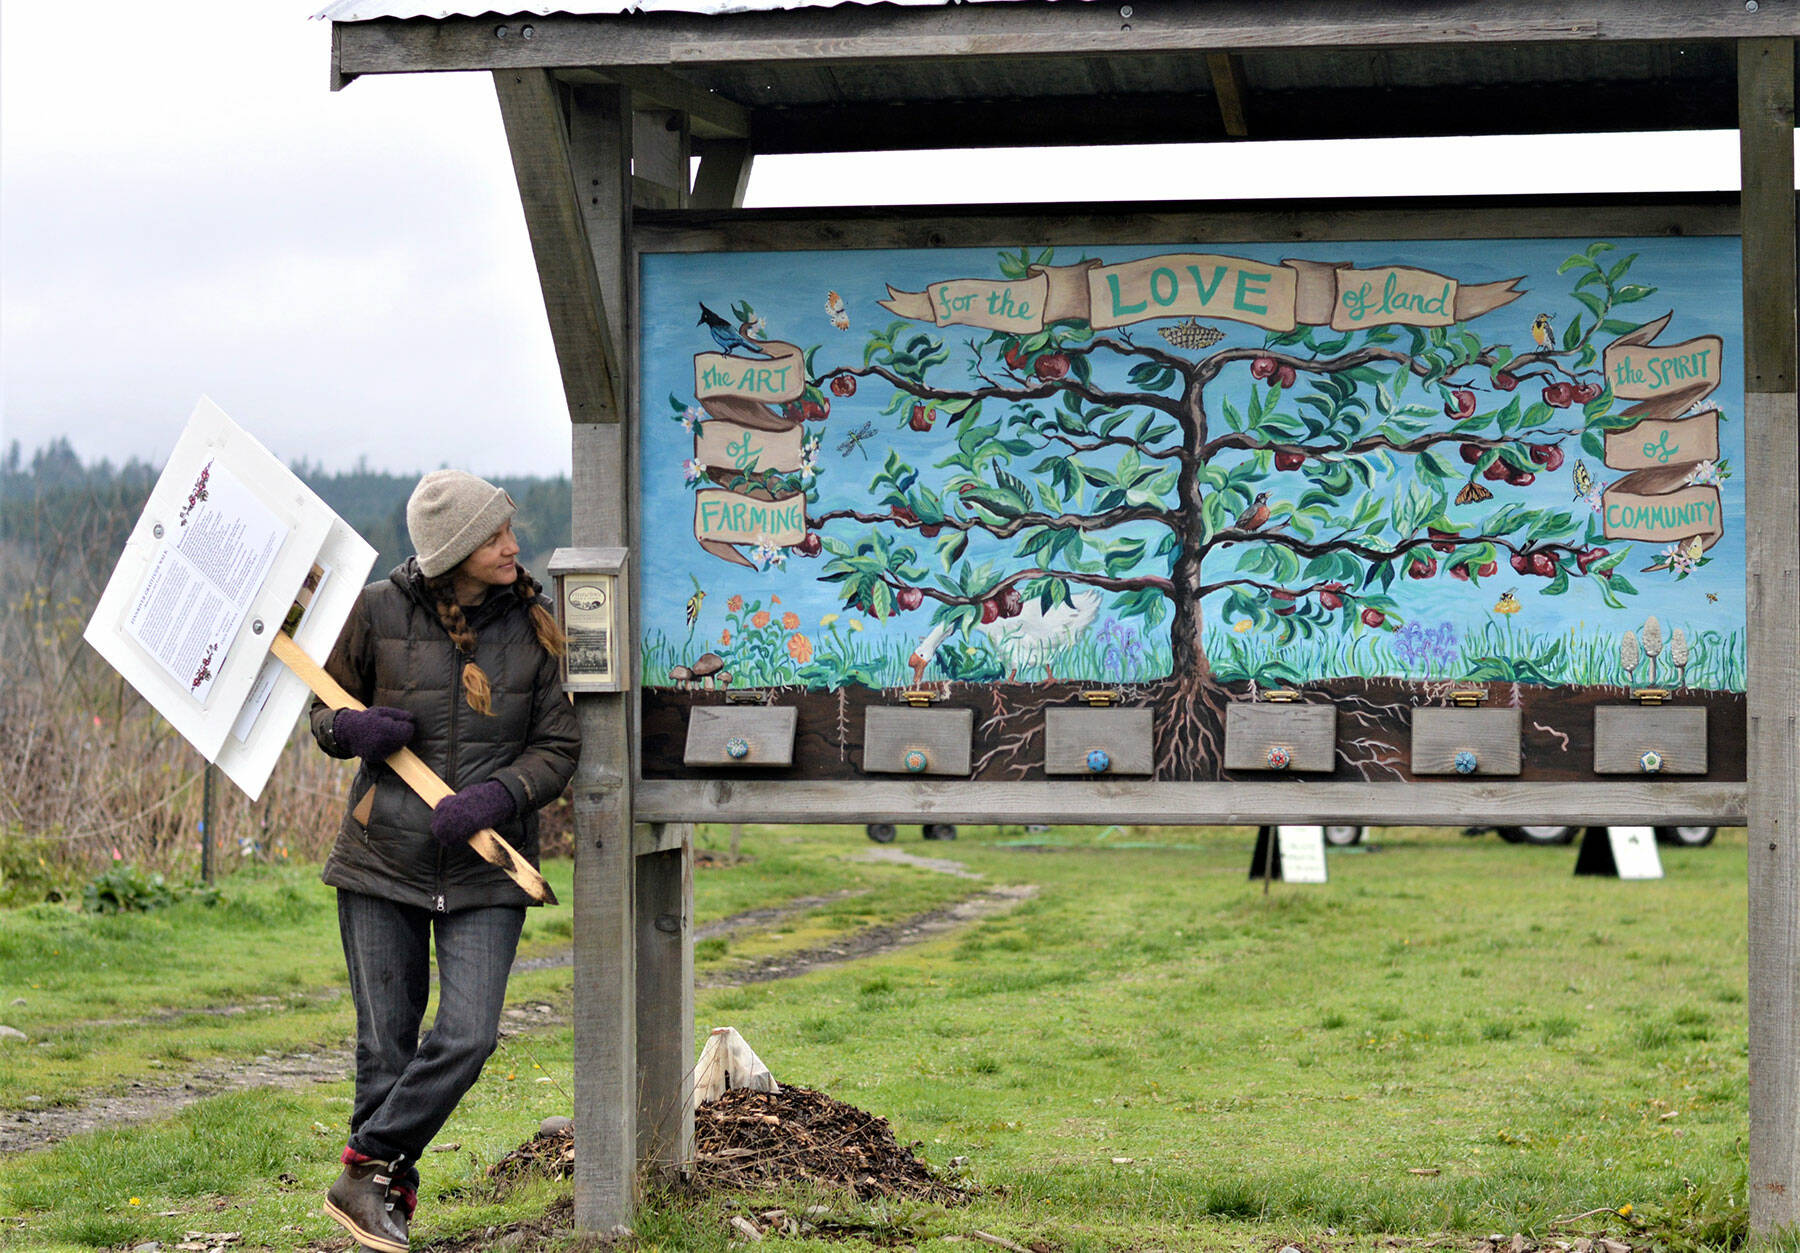 At Chimacum’s Finnriver Farm, cofounder Crystie Kisler admires Kira Mardikes’ painted tribute to the land and its creatures. The painting stands near Finnriver’s “gratitude walk,” part of the farm’s activities today through Sunday. (Diane Urbani de la Paz/Peninsula Daily News)